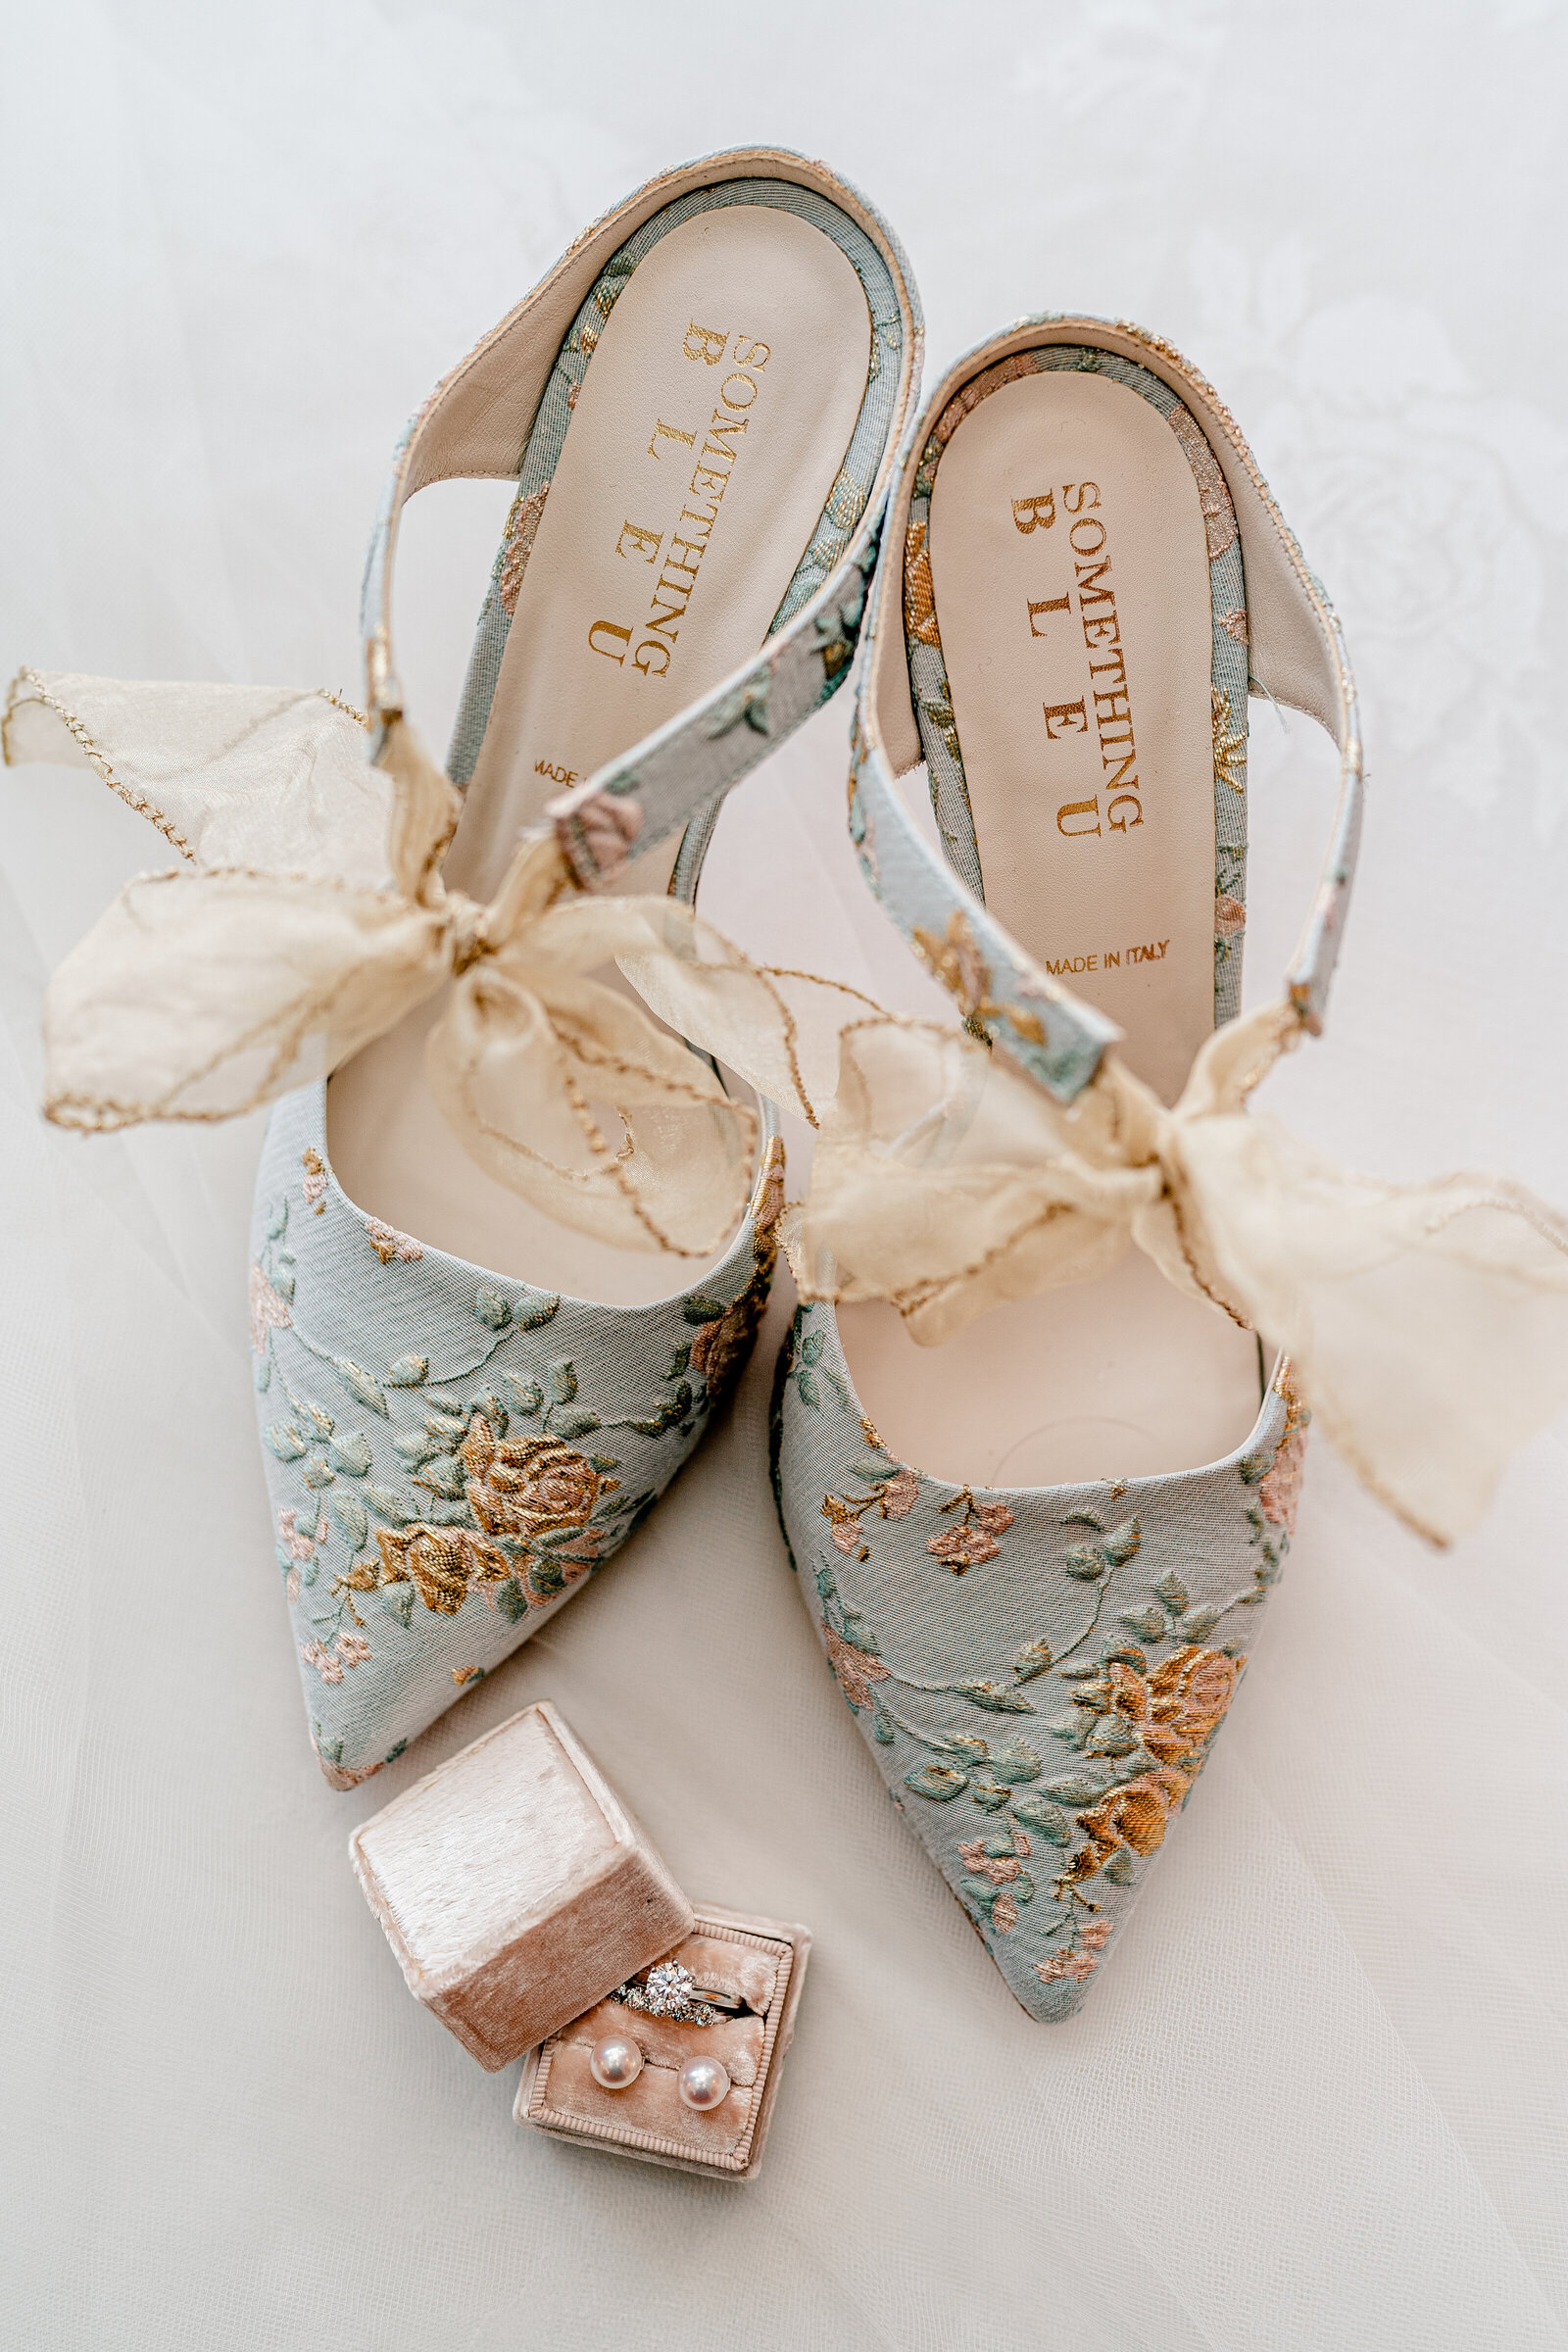 A pair of bridal shoes and jewelry for a wedding in Northern Virginia